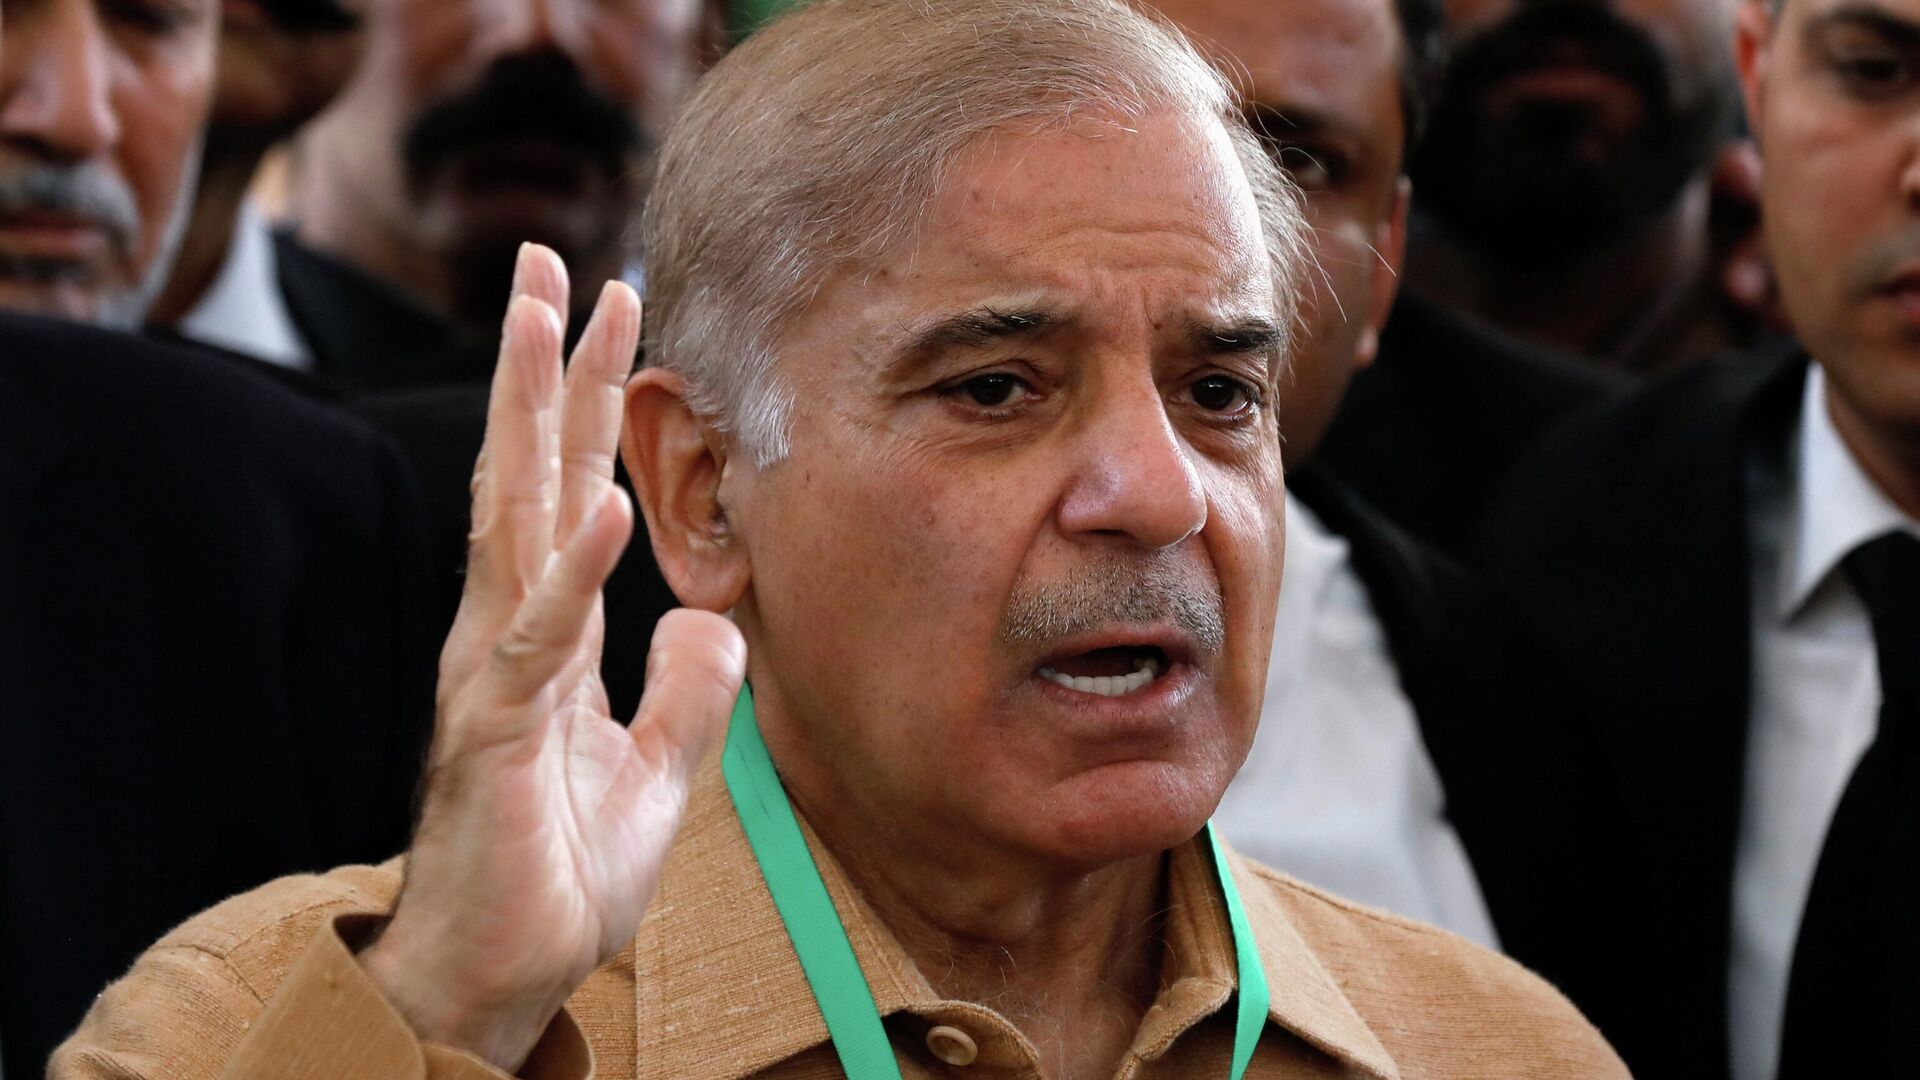 Leader of the opposition Mian Muhammad Shahbaz Sharif, brother of ex-Prime Minister Nawaz Sharif, gestures as he speaks to the media at the Supreme Court of Pakistan in Islamabad, Pakistan April 5, 2022. - Sputnik International, 1920, 28.04.2022